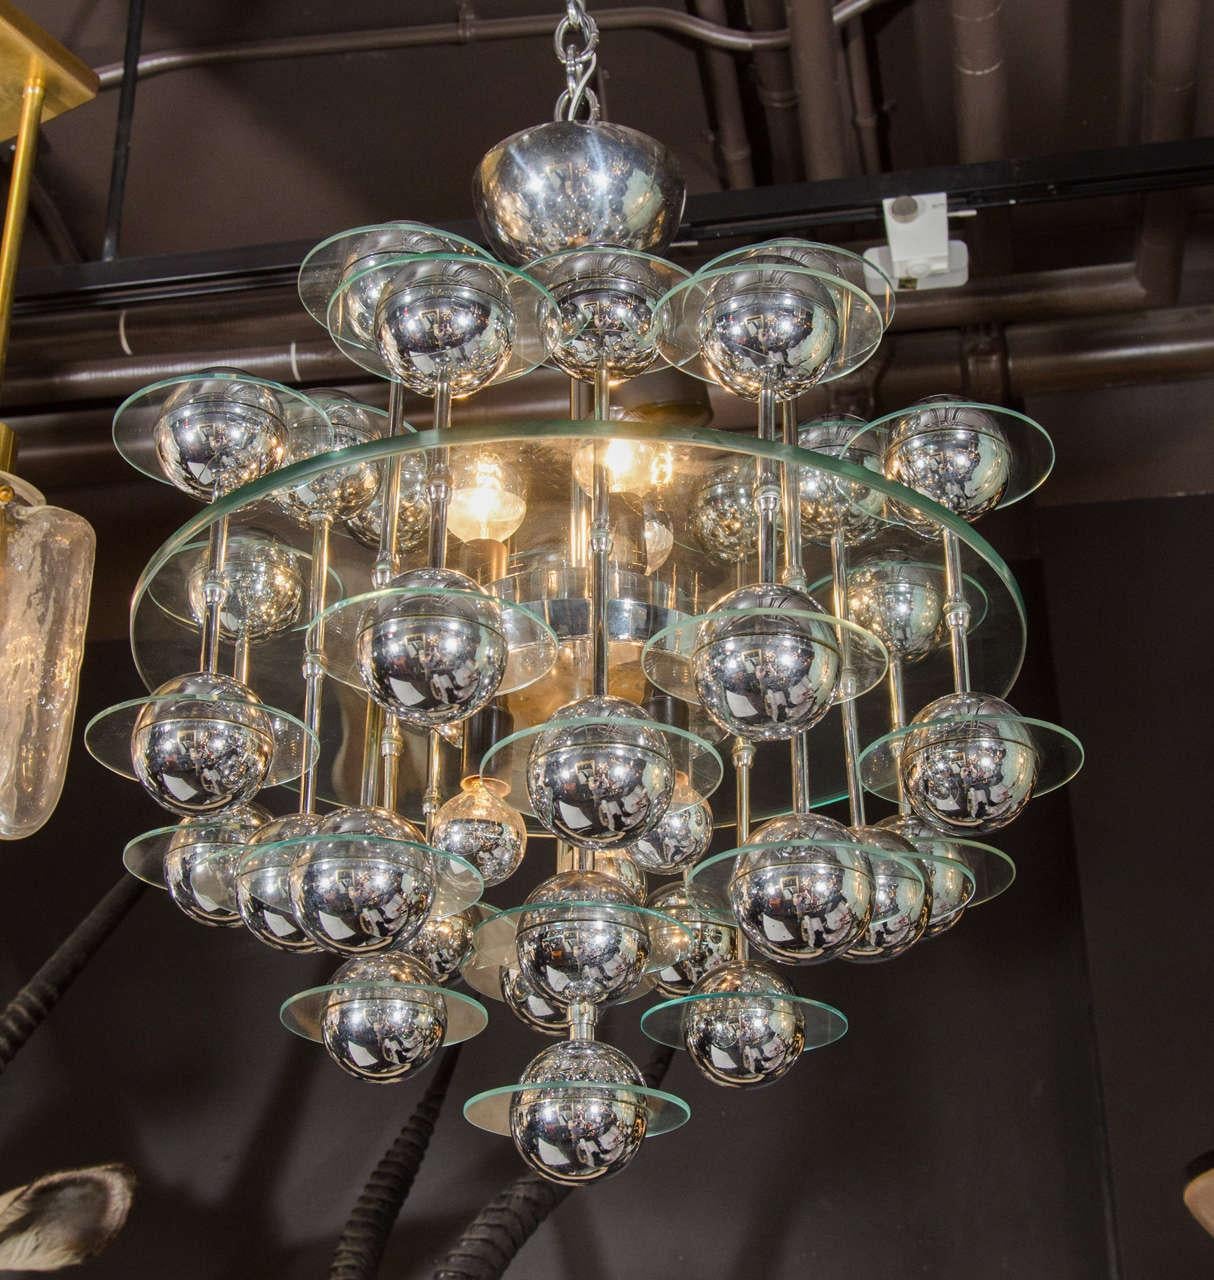 Italian Mid-Century Modern Kinetic satellite chandelier with Space Age Design. Features central glass disc with suspended spheres of chrome globes. Each orb has a smaller glass disc surrounding it. The spheres hang from chrome rods attached through